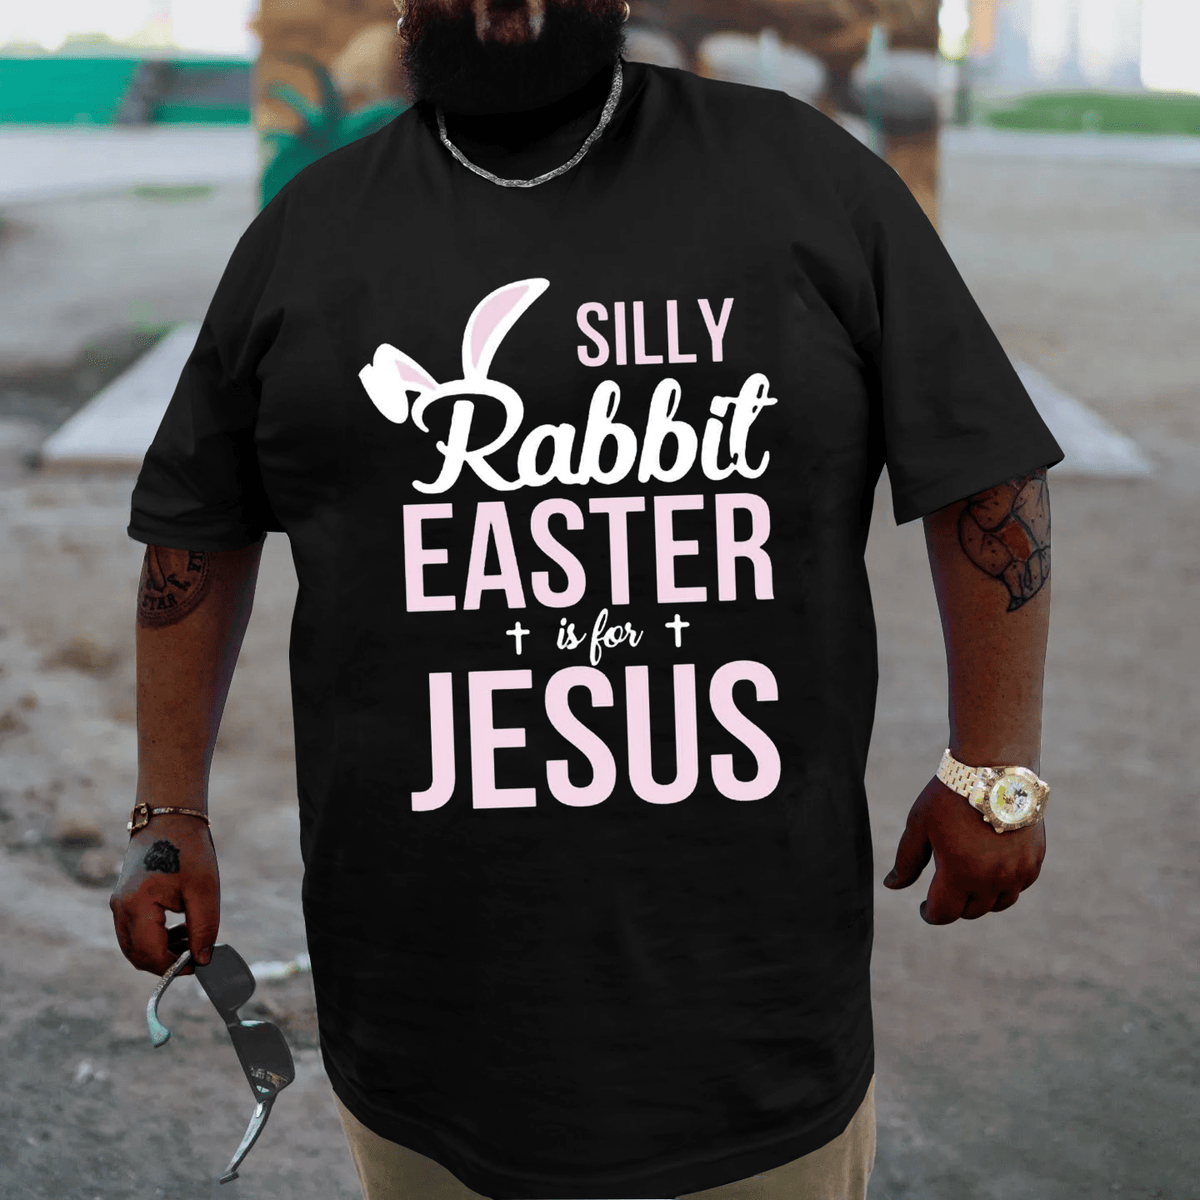 Silly Rabbit Easter is for Jesus Plus Size T-shirt